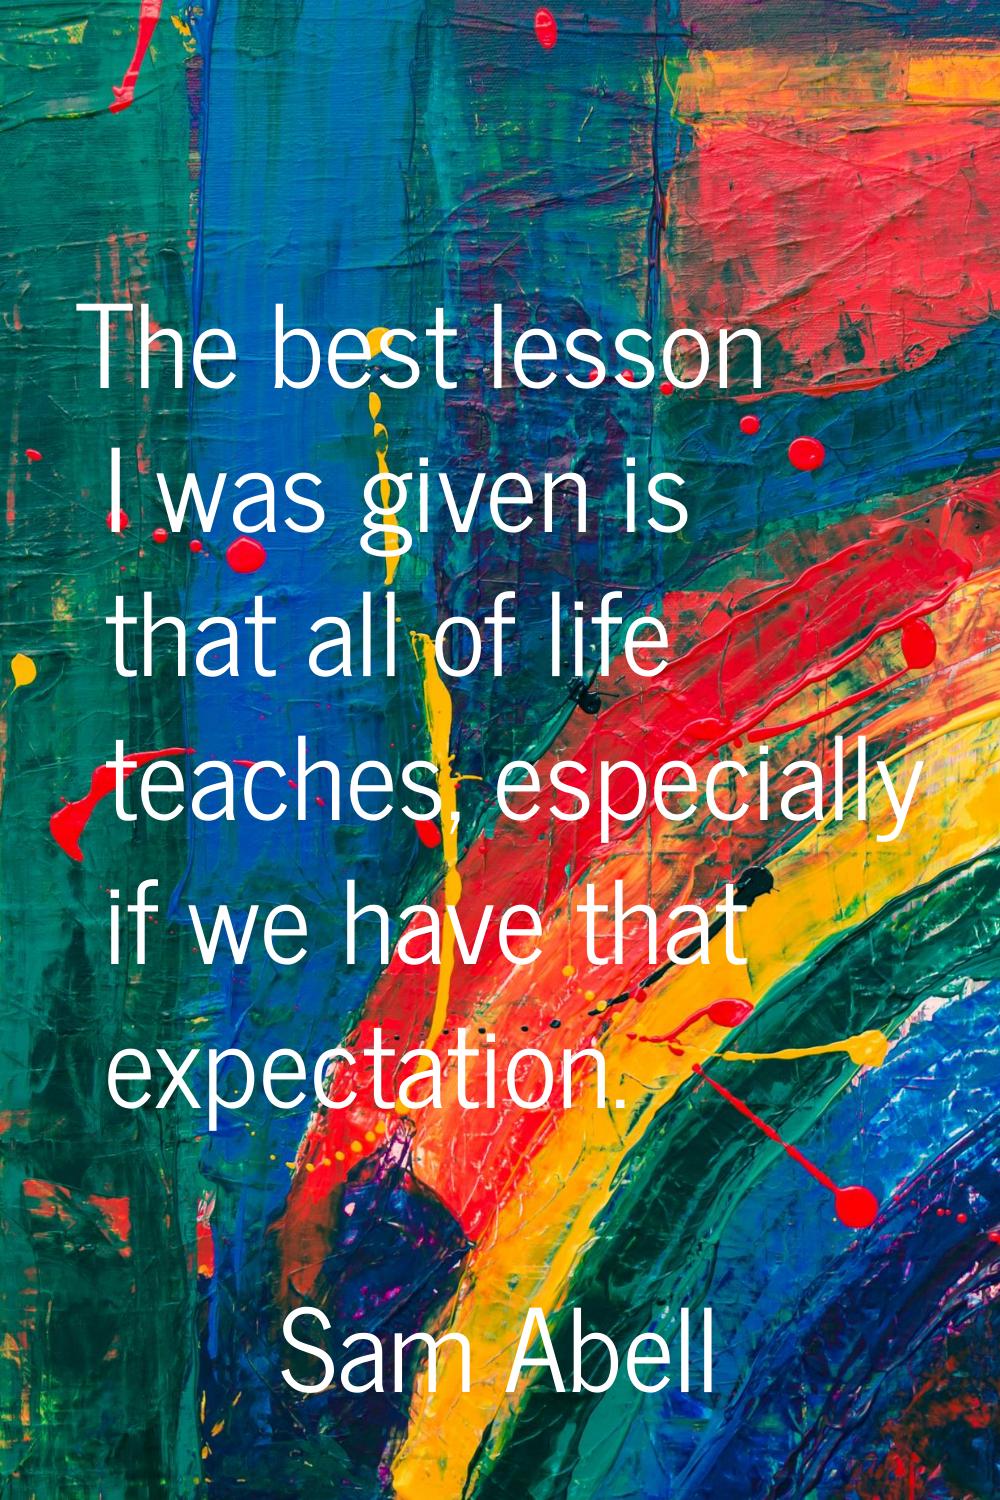 The best lesson I was given is that all of life teaches, especially if we have that expectation.